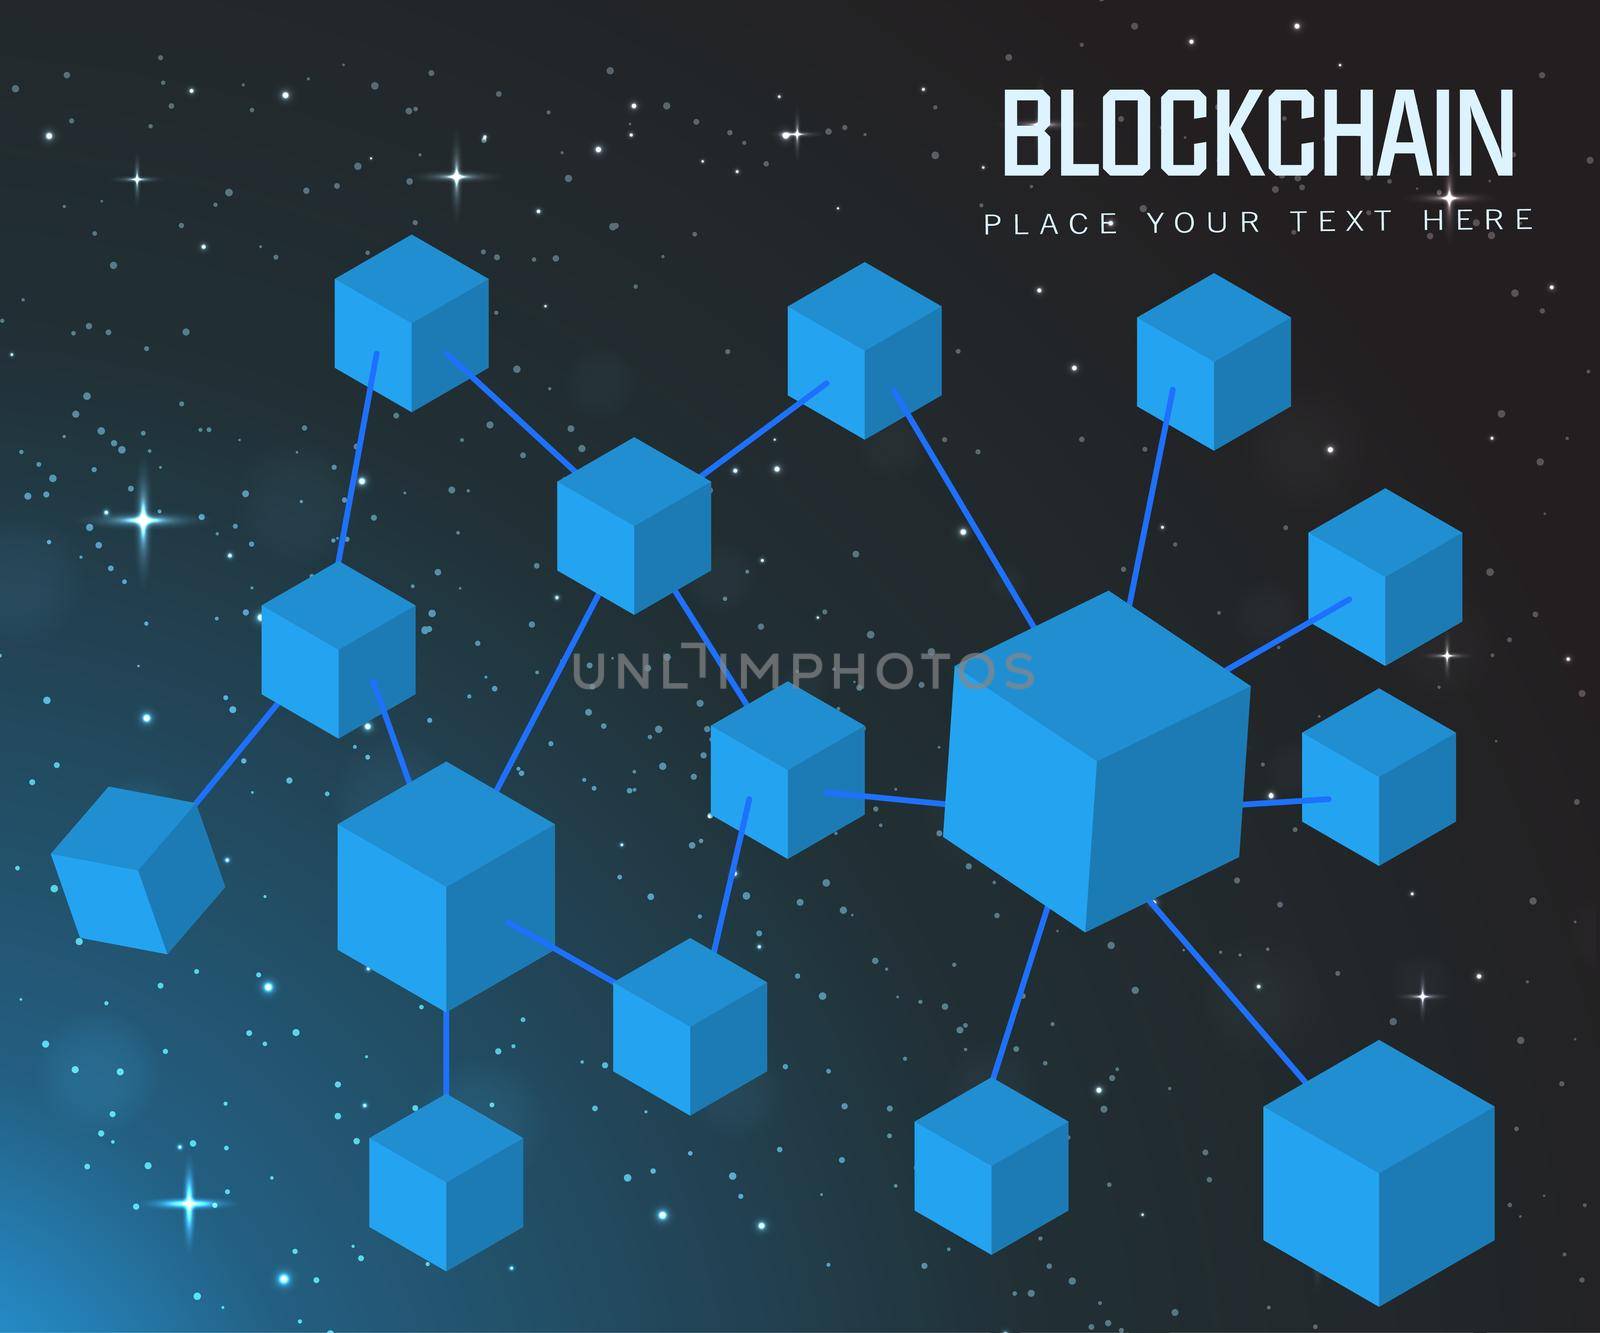 Virtual isometric 3D Blockchain technology, cube system concept design by ANITA